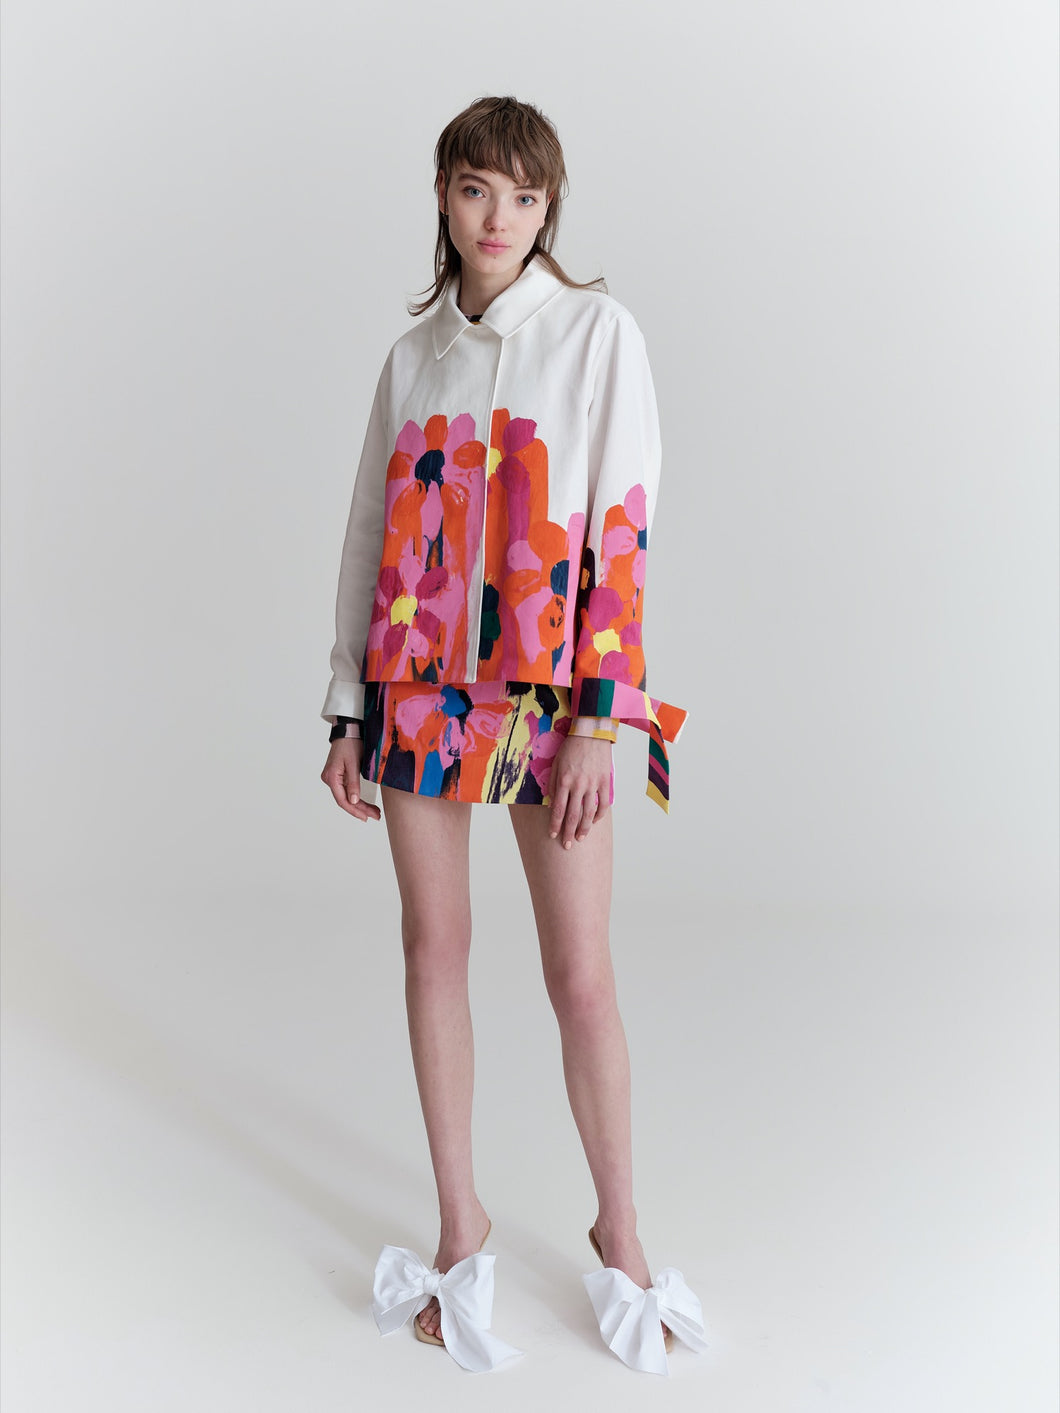 Flower jacket, Off-white with handprinted flowers